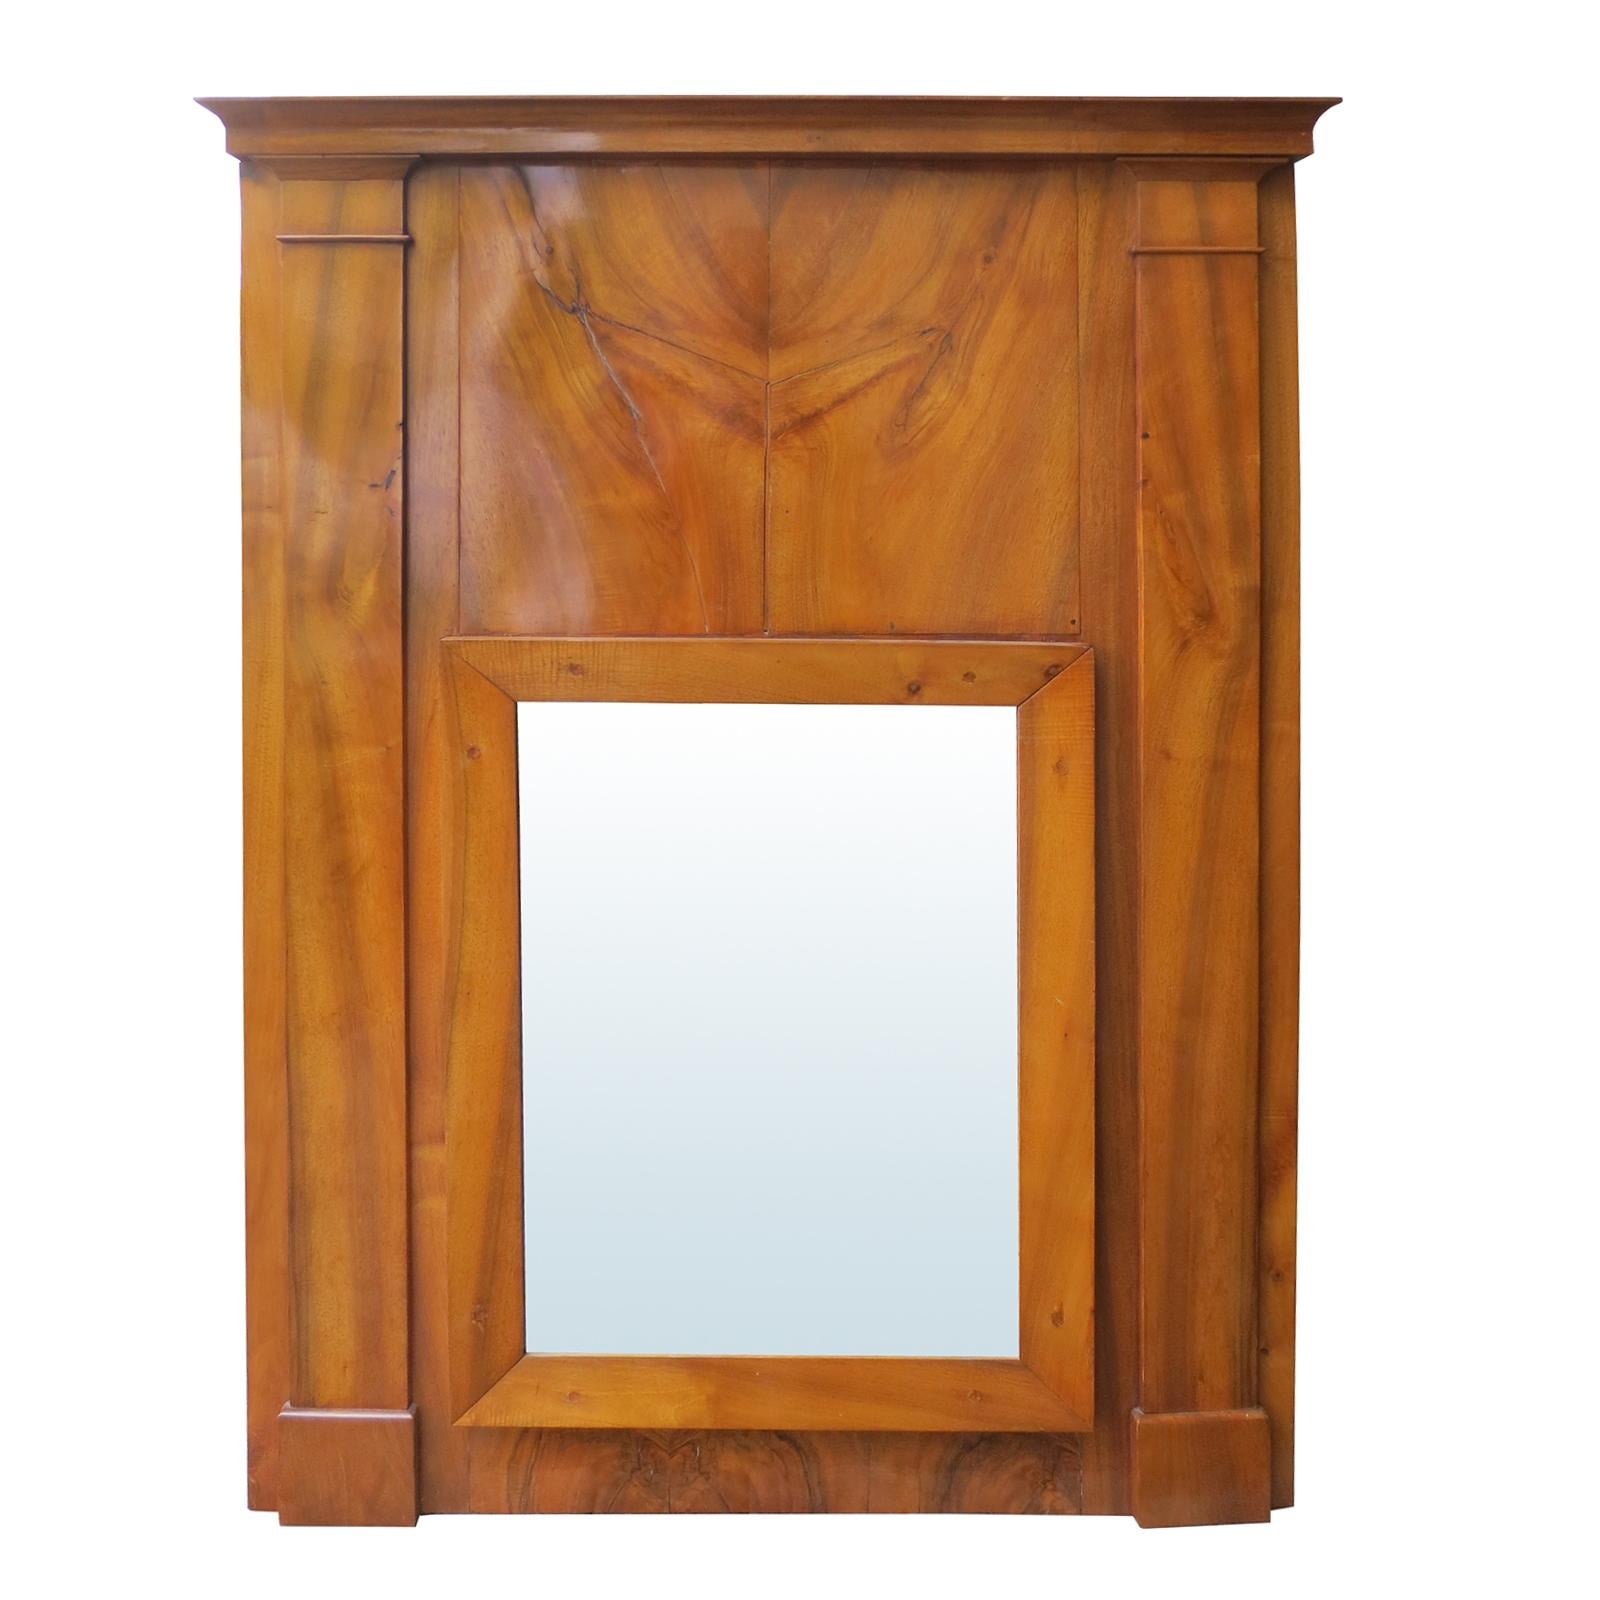 19th century French fruitwood Charles X mirror.